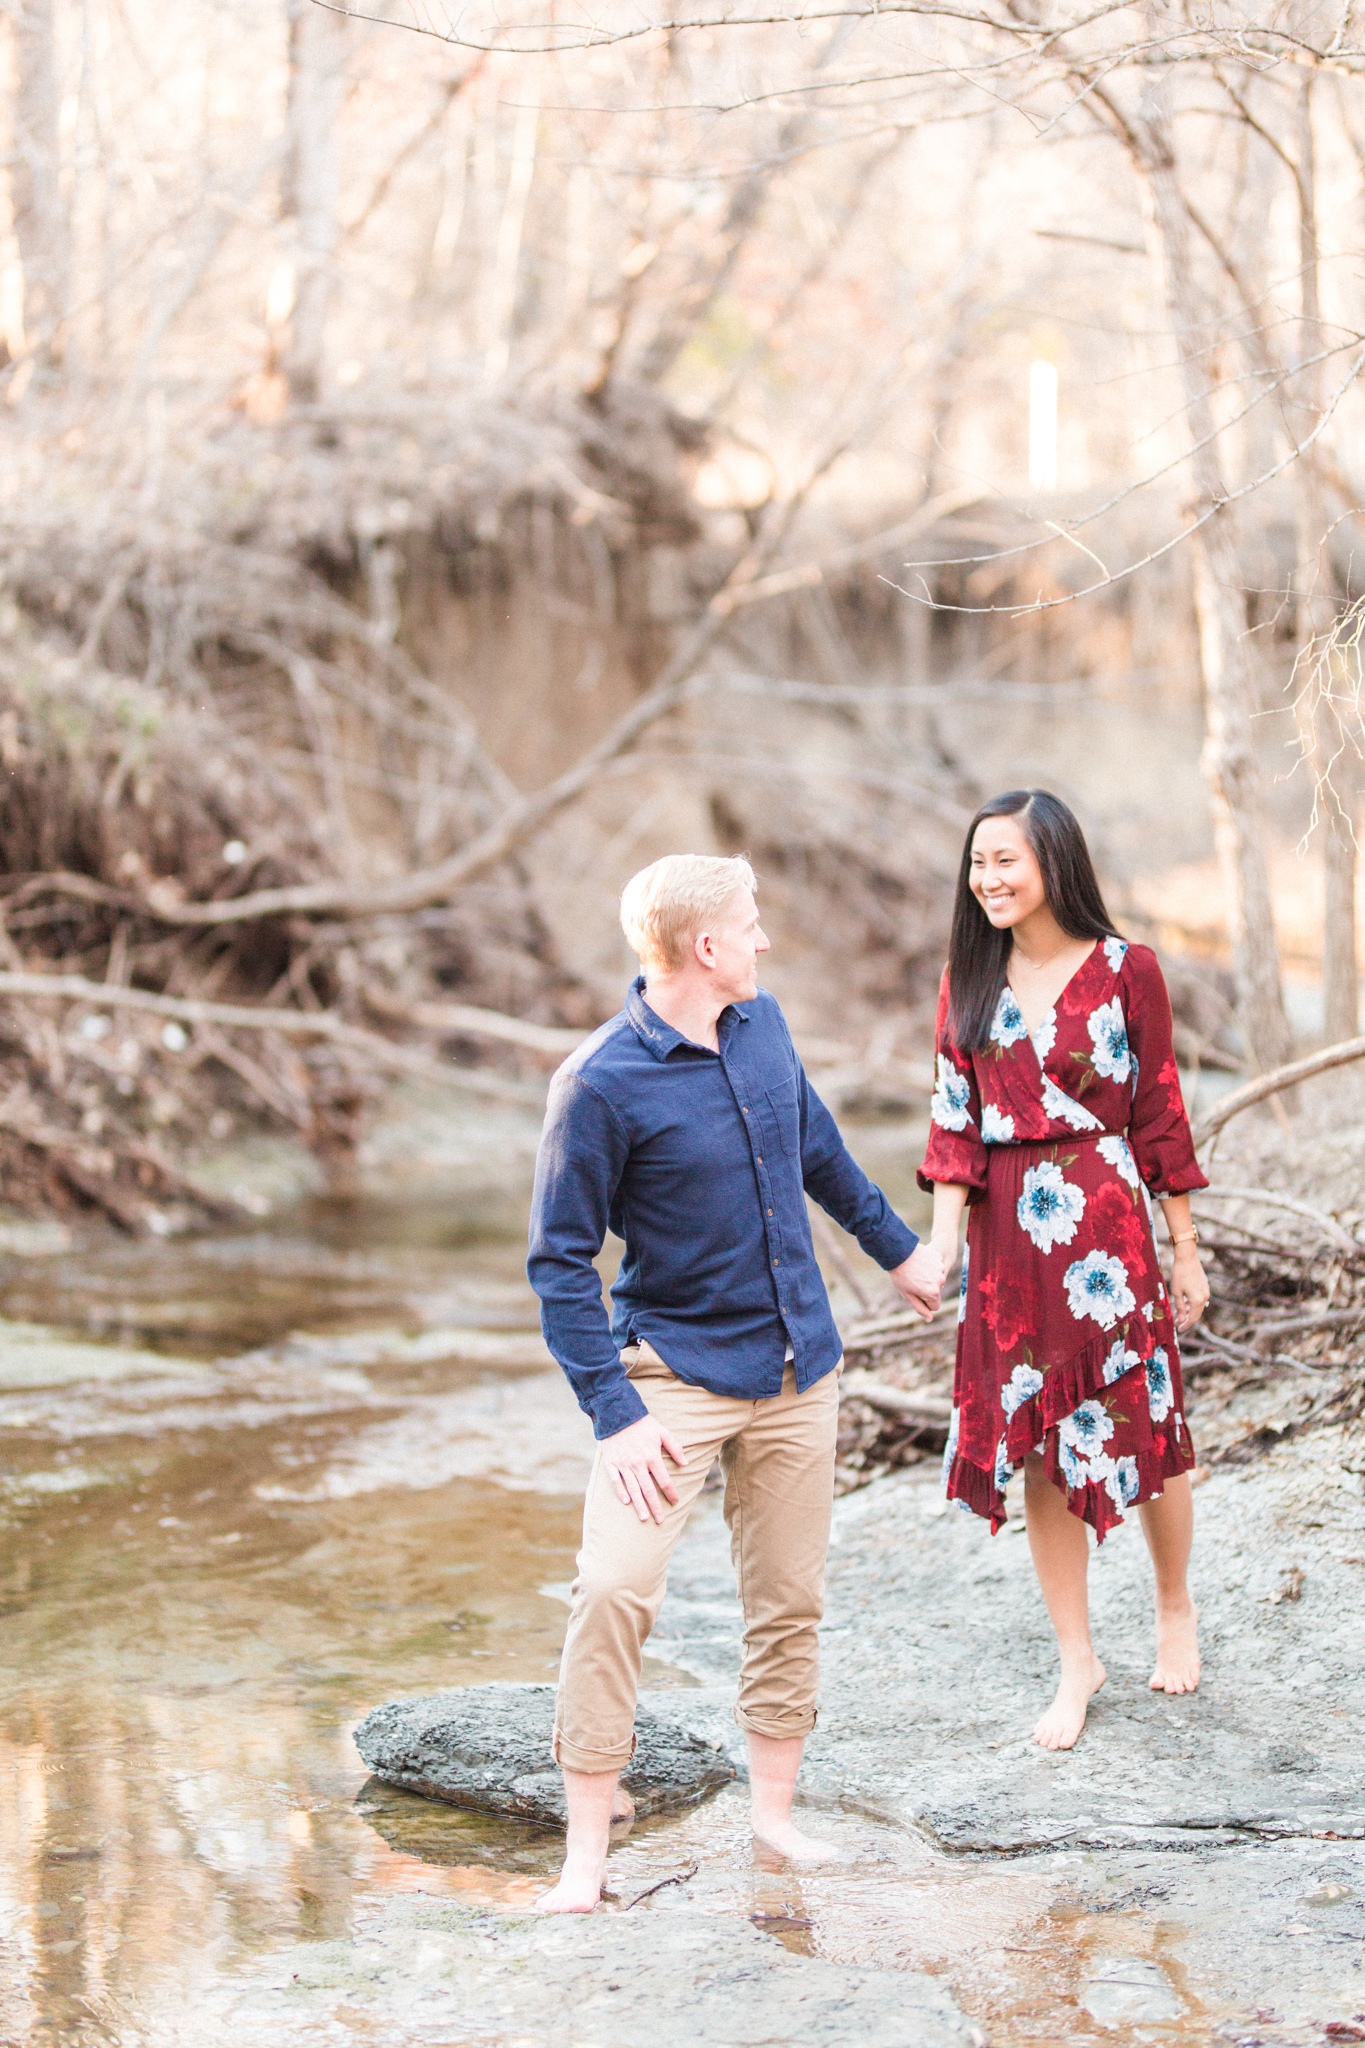 Arbor Hills and Target Engagement Session | Sami Kathryn Photography | Dallas, Texas Wedding Photographer